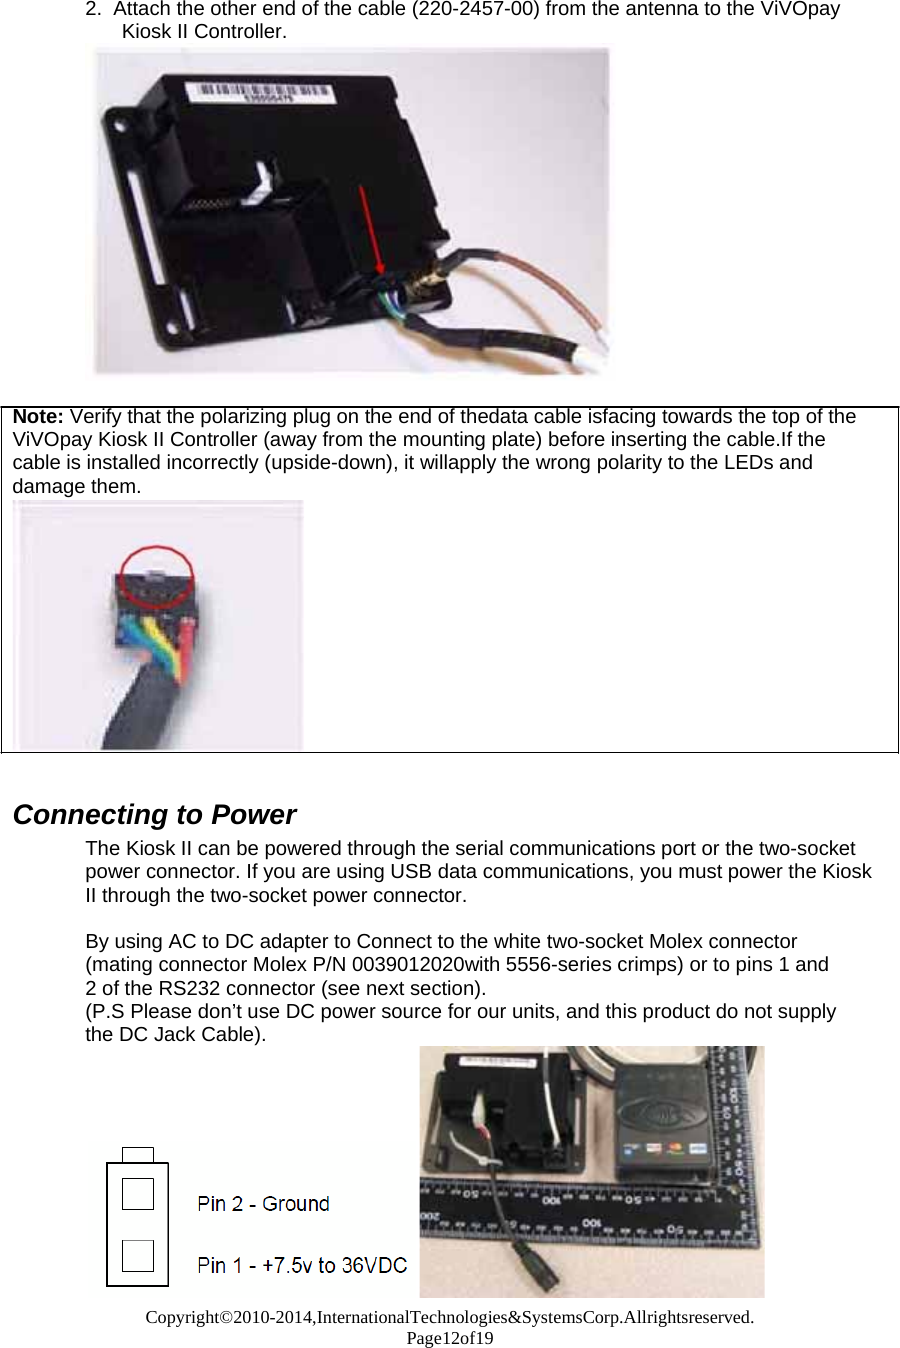 Copyright©2010-2014,InternationalTechnologies&amp;SystemsCorp.Allrightsreserved. Page12of19   2.  Attach the other end of the cable (220-2457-00) from the antenna to the ViVOpay Kiosk II Controller.   Note: Verify that the polarizing plug on the end of thedata cable isfacing towards the top of the ViVOpay Kiosk II Controller (away from the mounting plate) before inserting the cable.If the cable is installed incorrectly (upside-down), it willapply the wrong polarity to the LEDs and damage them.                Connecting to Power The Kiosk II can be powered through the serial communications port or the two-socket power connector. If you are using USB data communications, you must power the Kiosk II through the two-socket power connector.  By using AC to DC adapter to Connect to the white two-socket Molex connector (mating connector Molex P/N 0039012020with 5556-series crimps) or to pins 1 and 2 of the RS232 connector (see next section). (P.S Please don’t use DC power source for our units, and this product do not supply the DC Jack Cable). 